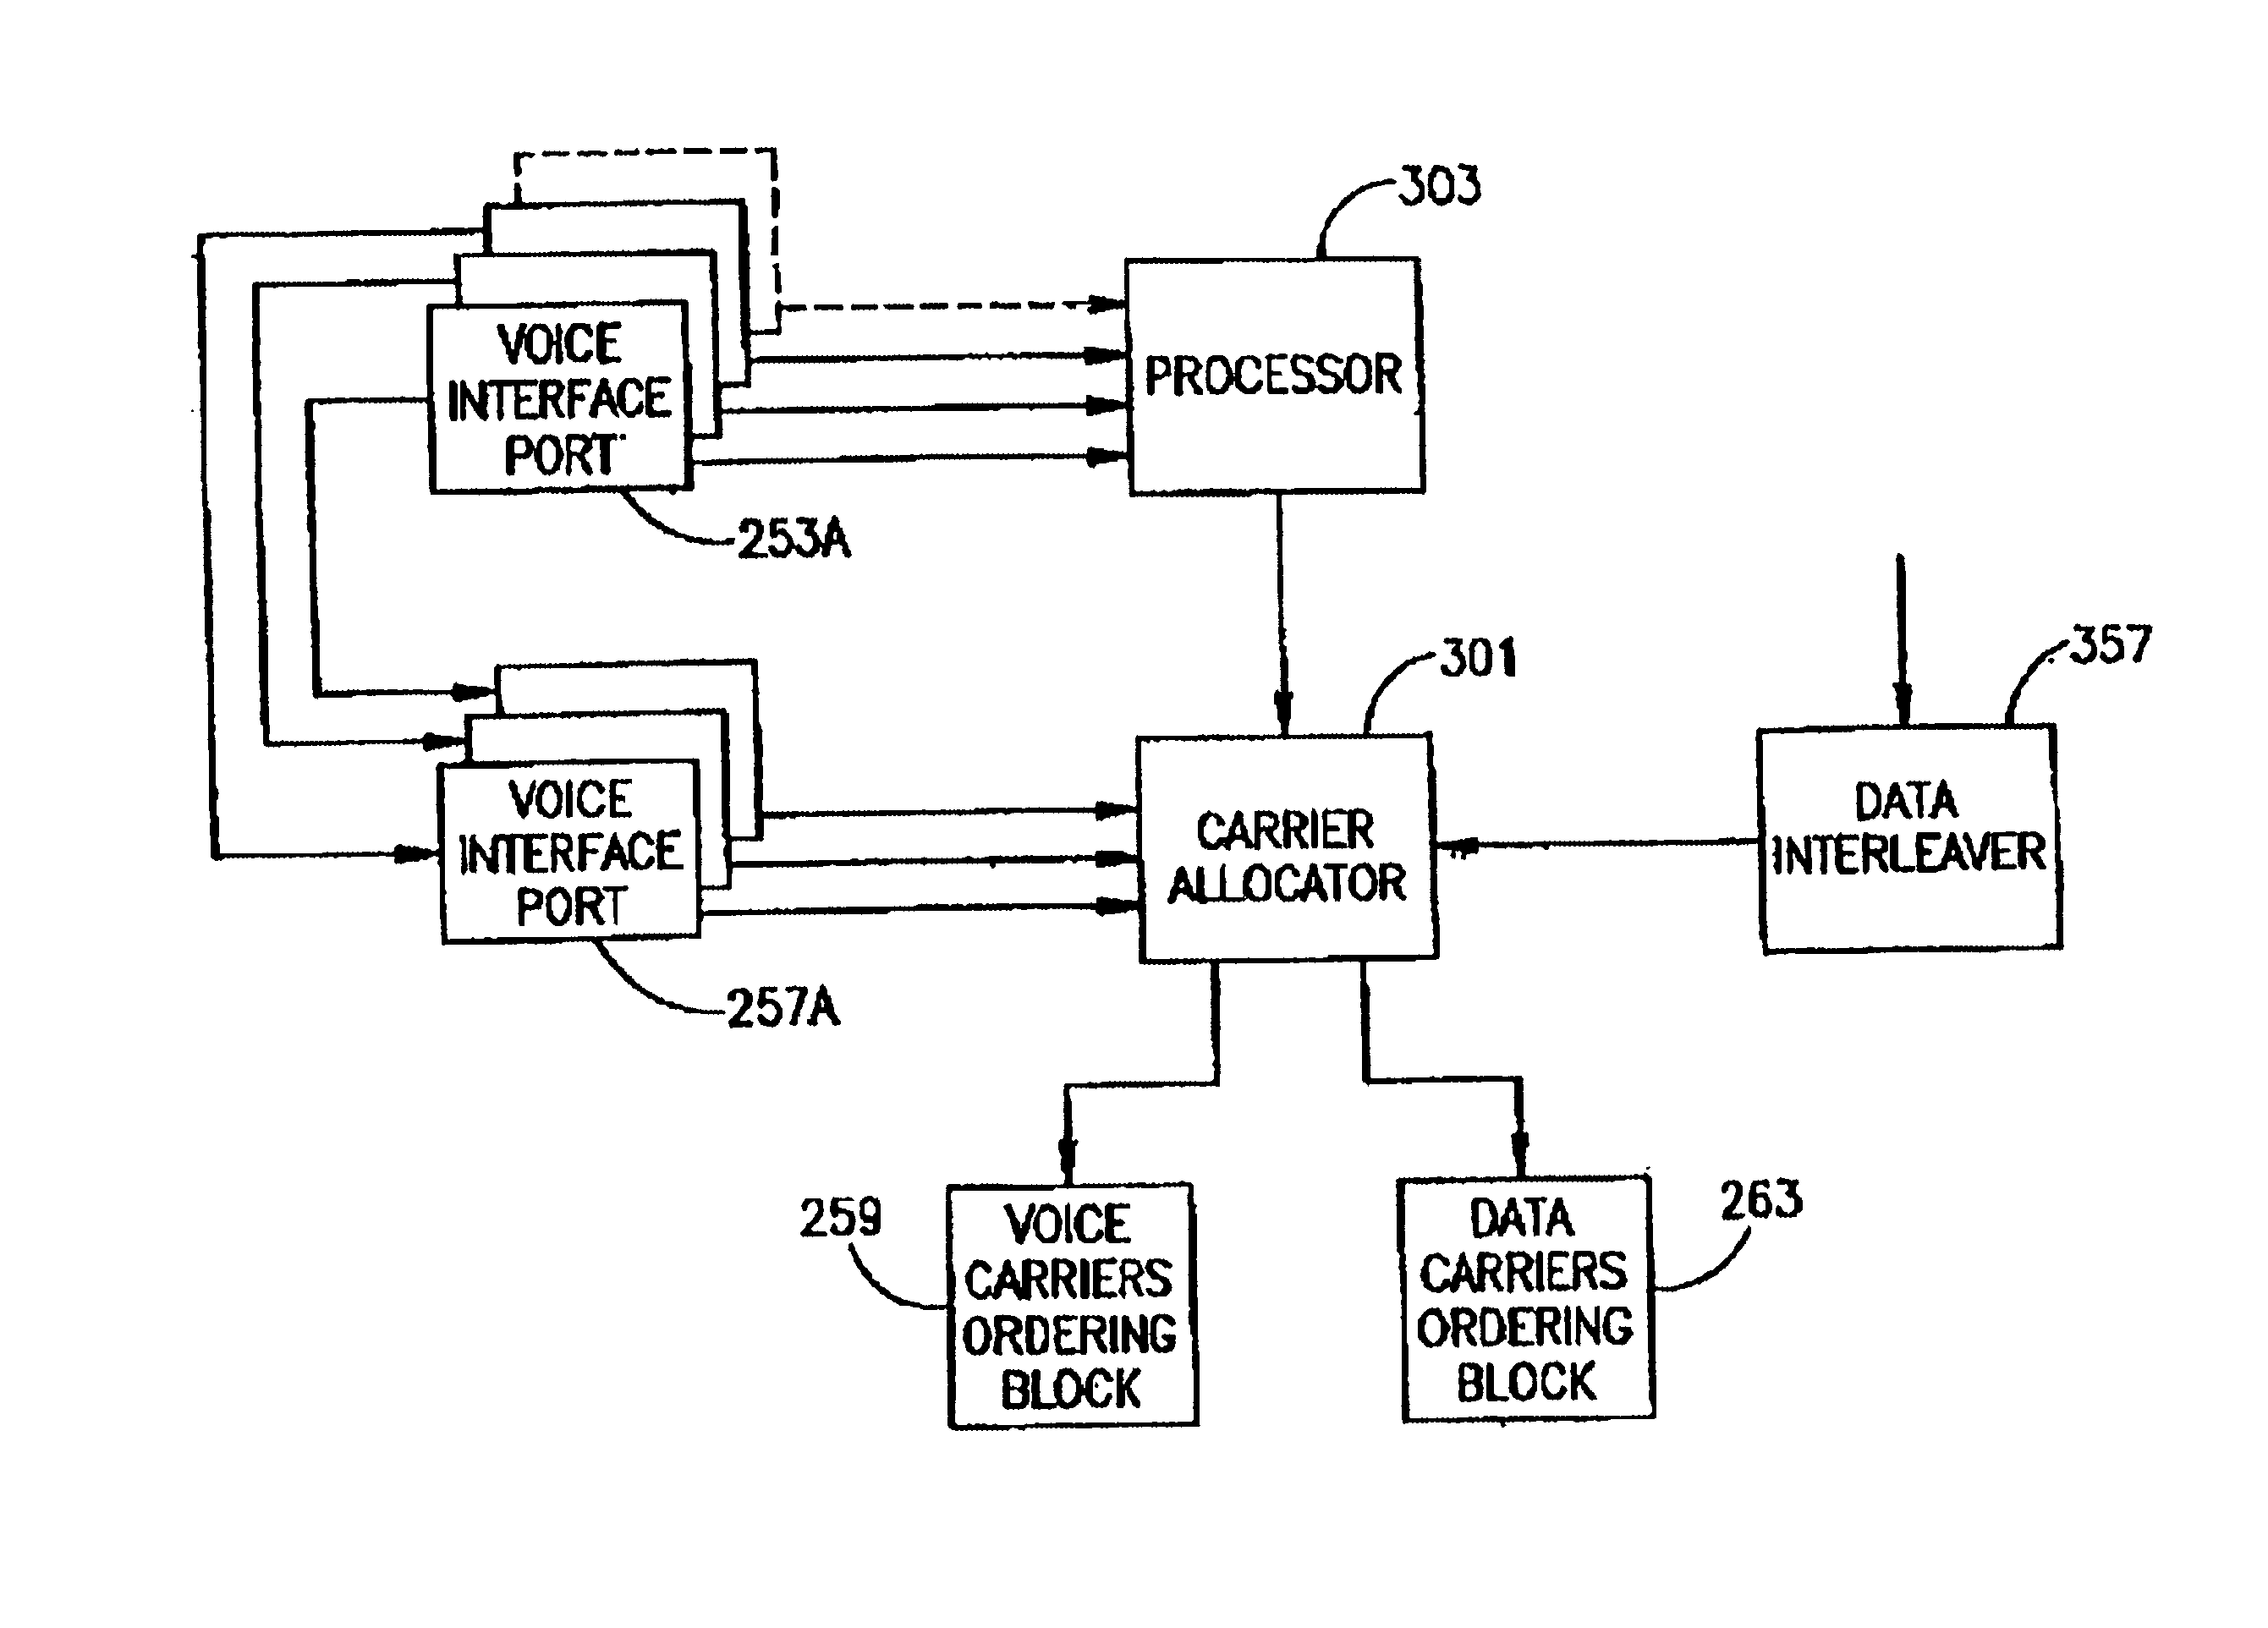 Communication systems conveying voice and data signals over standard telephone lines